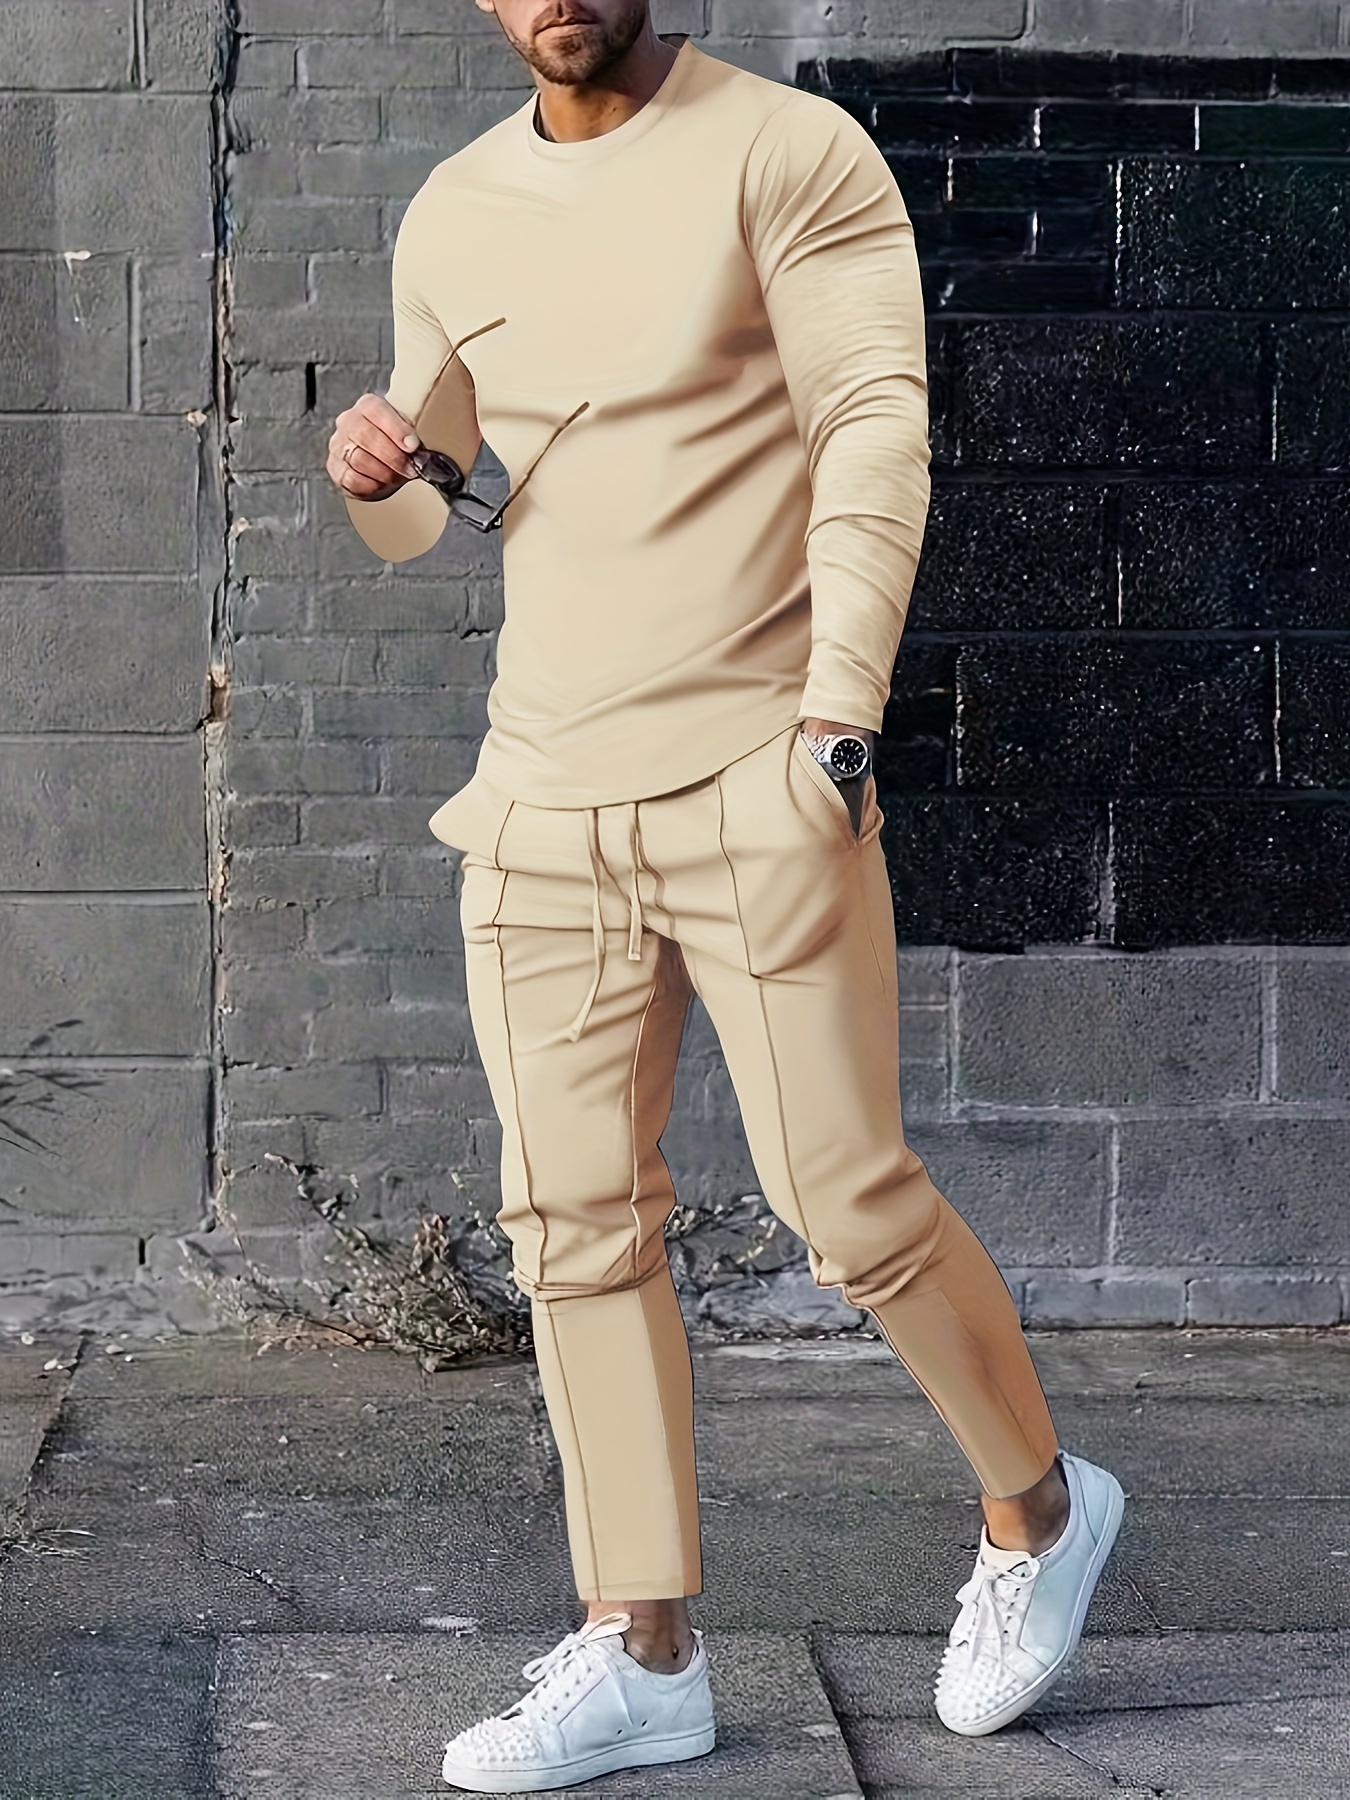 Mens 2 Piece Outfits, Comfy Long Sleeve T-shirt And Casual Drawstring Pants  Set For Autumn, Men's Clothing, Shop Now For Limited-time Deals